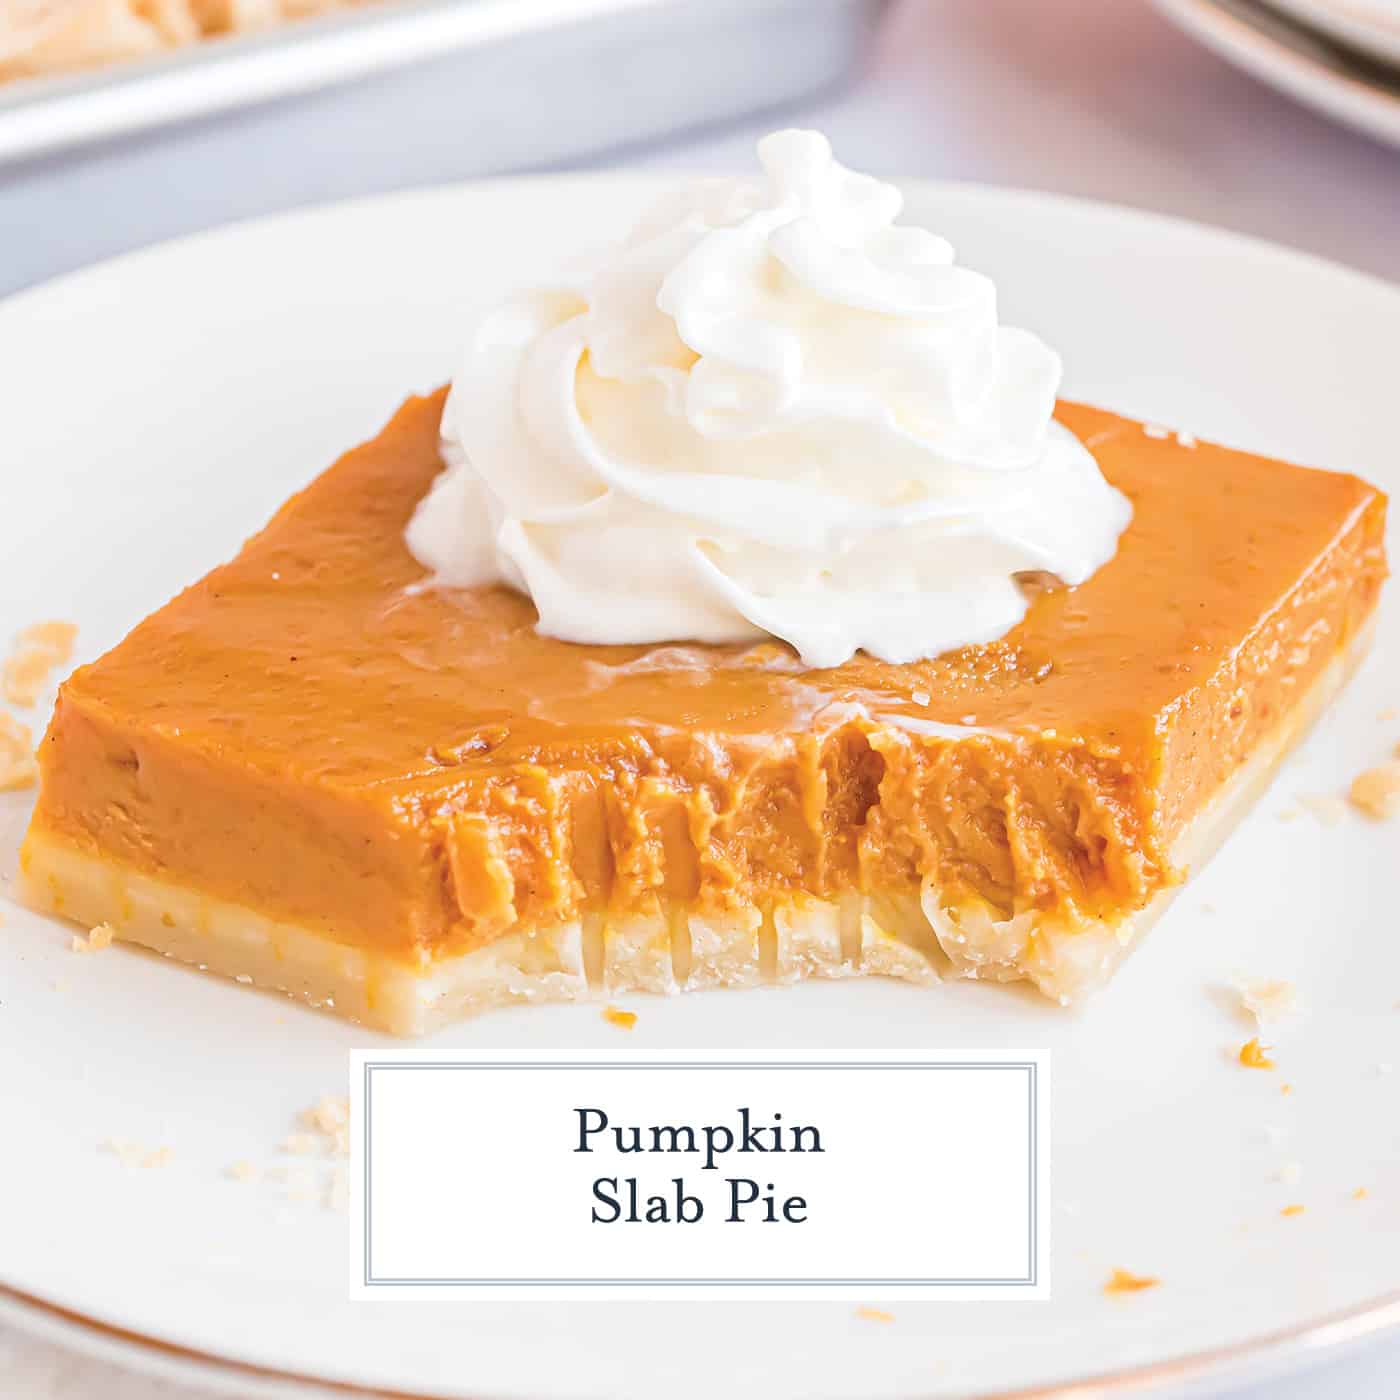 pumpkin slab pie with a bite taken out on a plate